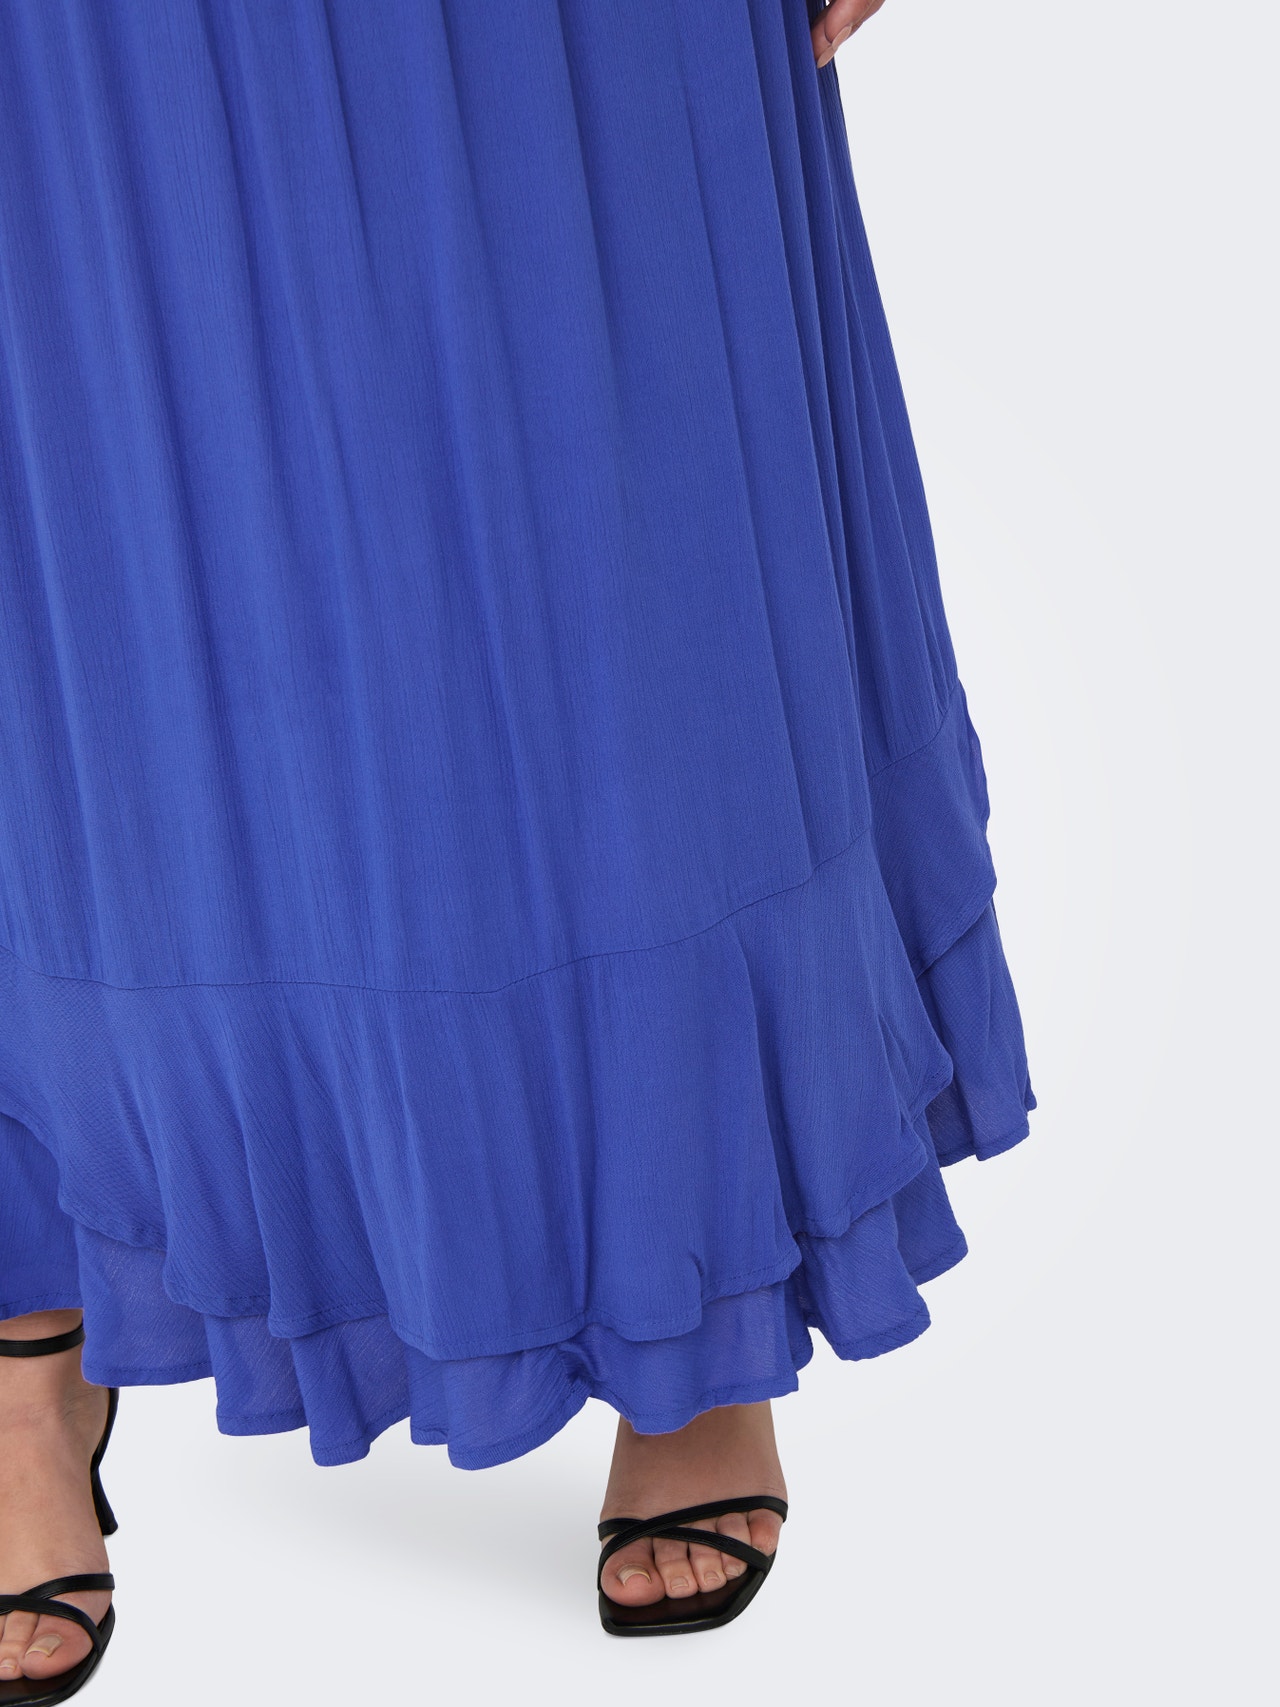 ONLY Curvy maxi skirt -Dazzling Blue - 15290011